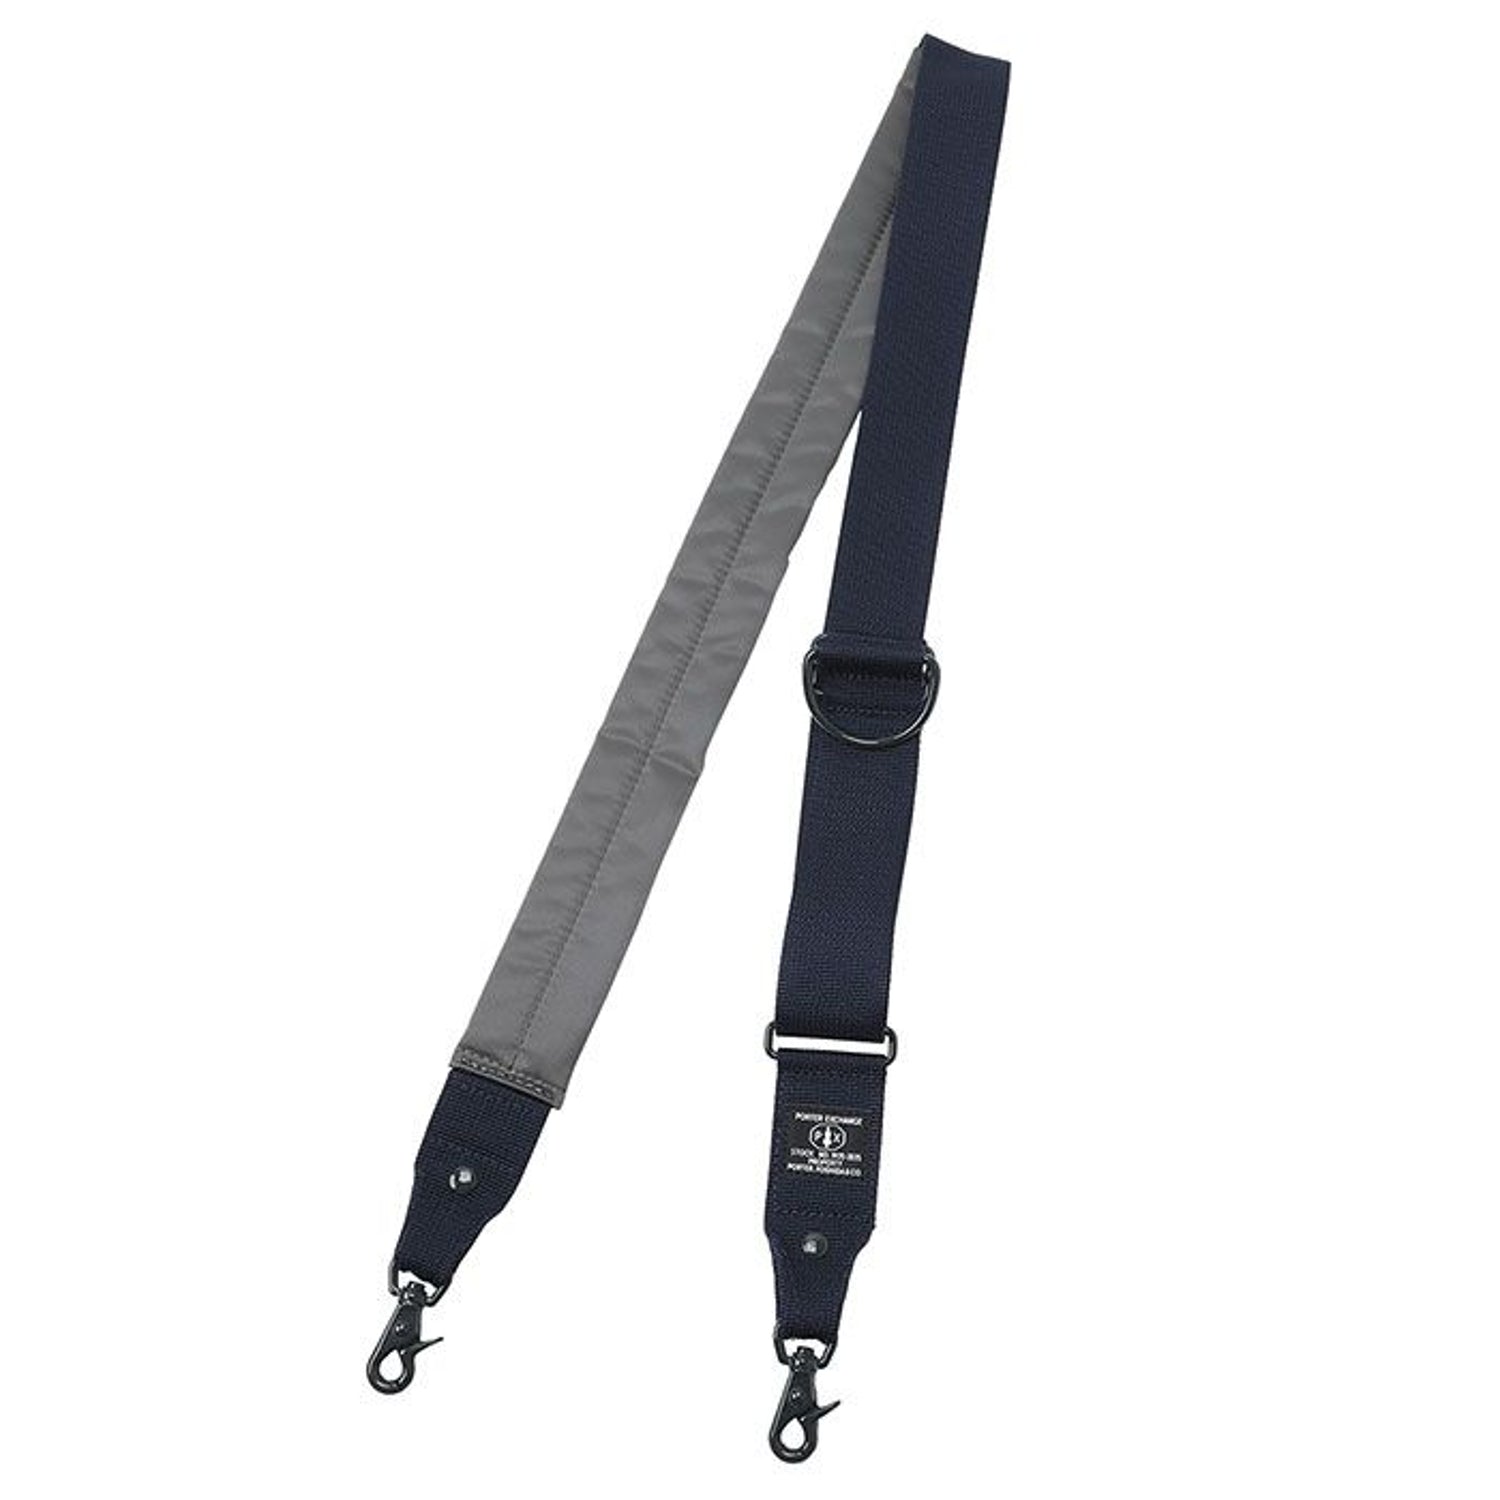 PORTER - PX Tanker Carrying Equipment Strap 40 - (Silver Gray) view 1